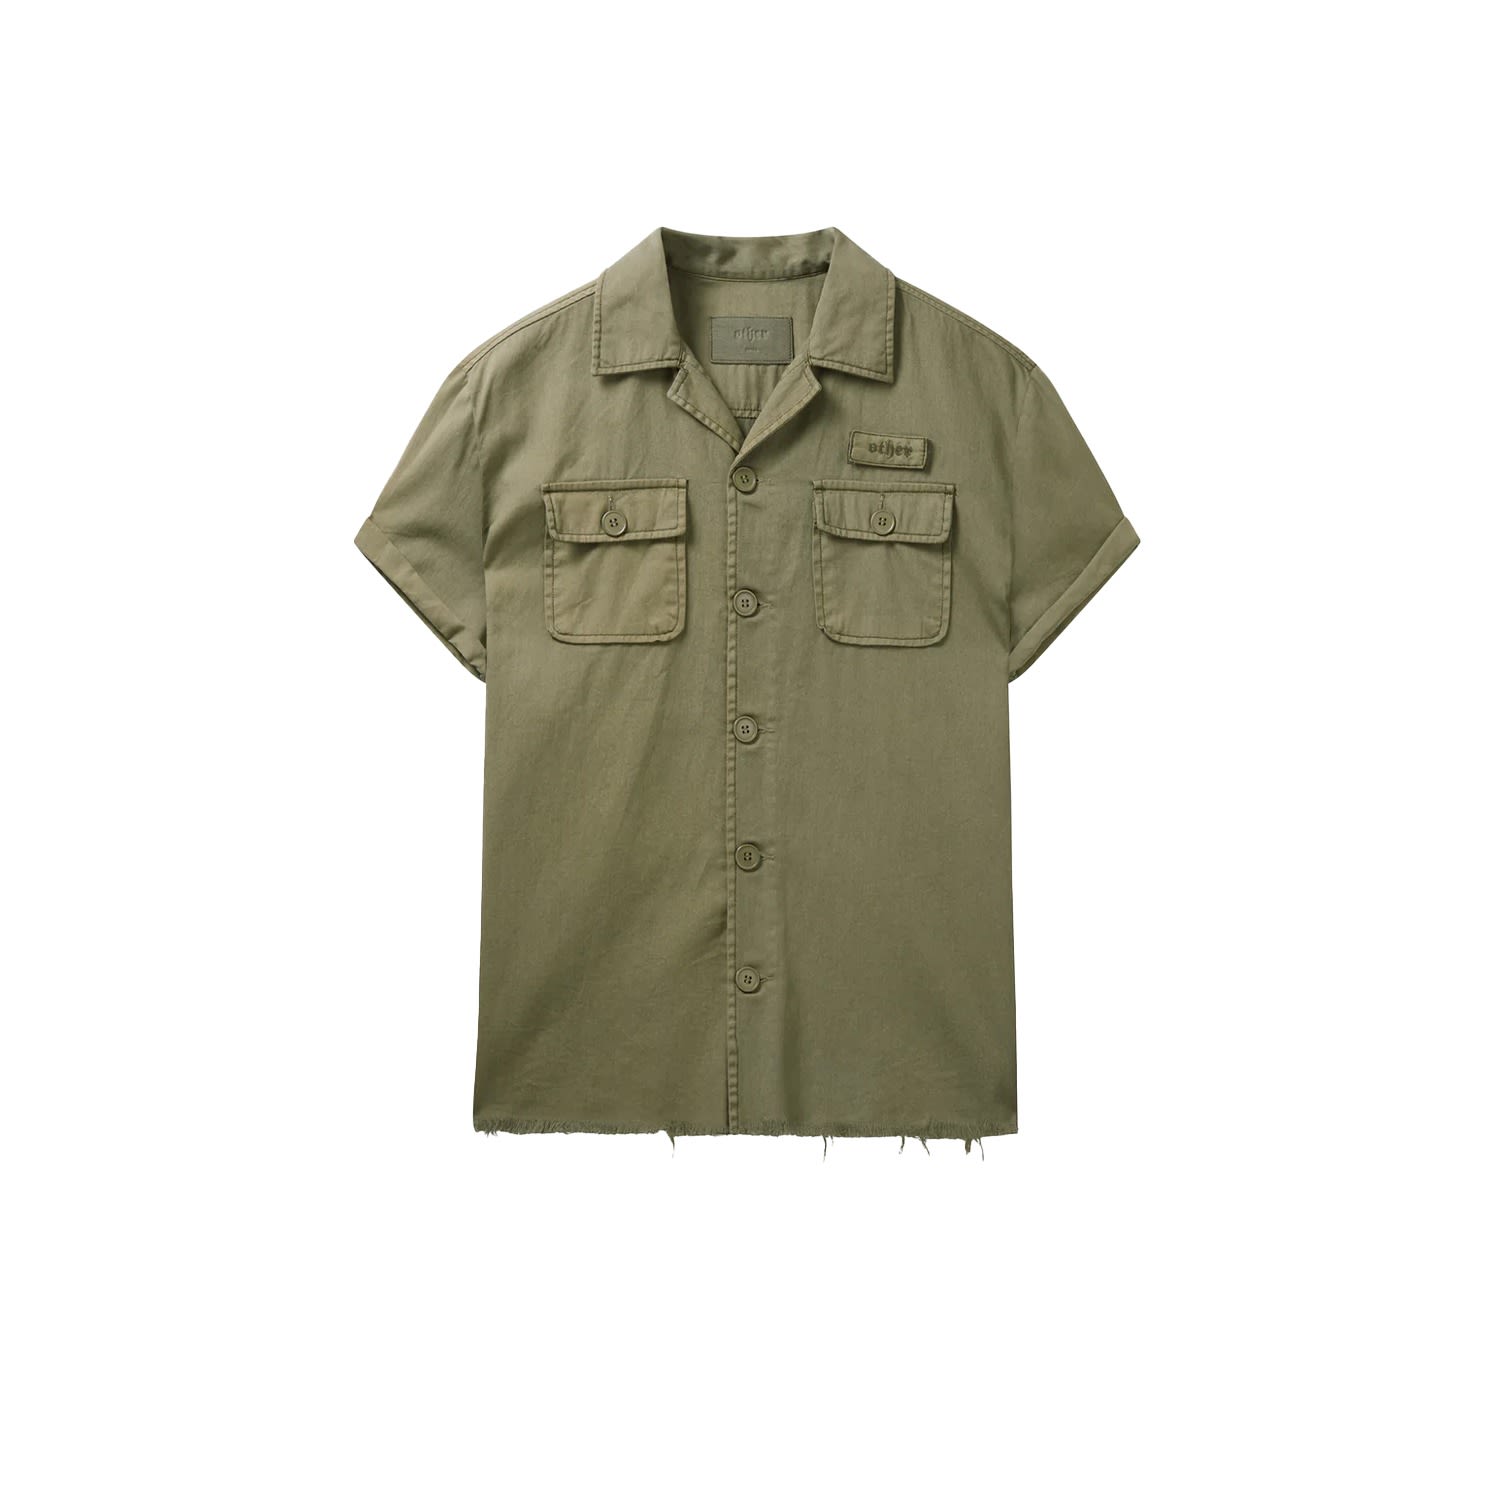 Men's S/S Military Shirt - Military Green Extra Small Wolf & Badger